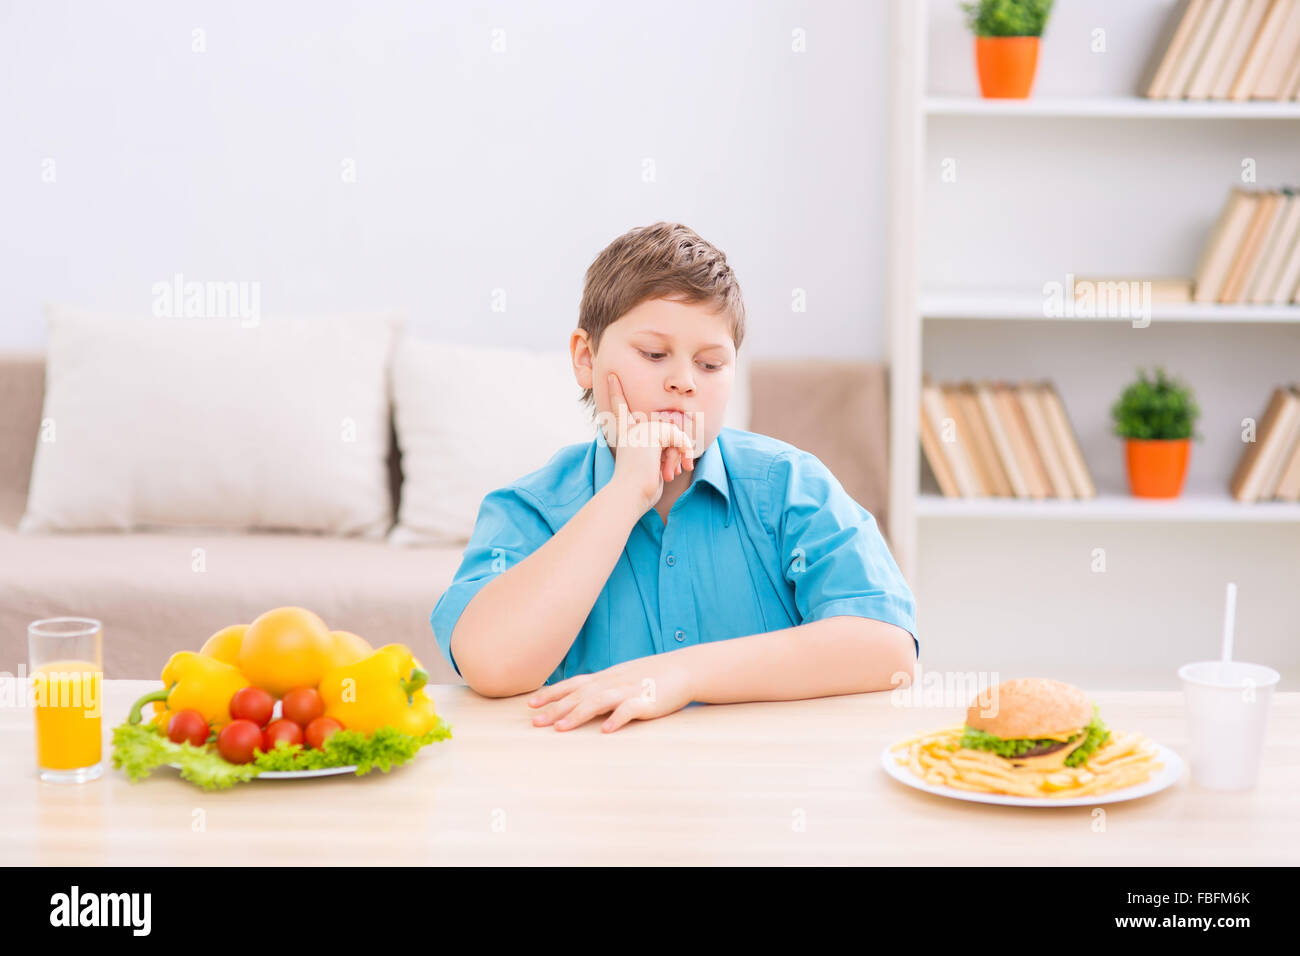 Chubby kid choosing food at the table. Stock Photo